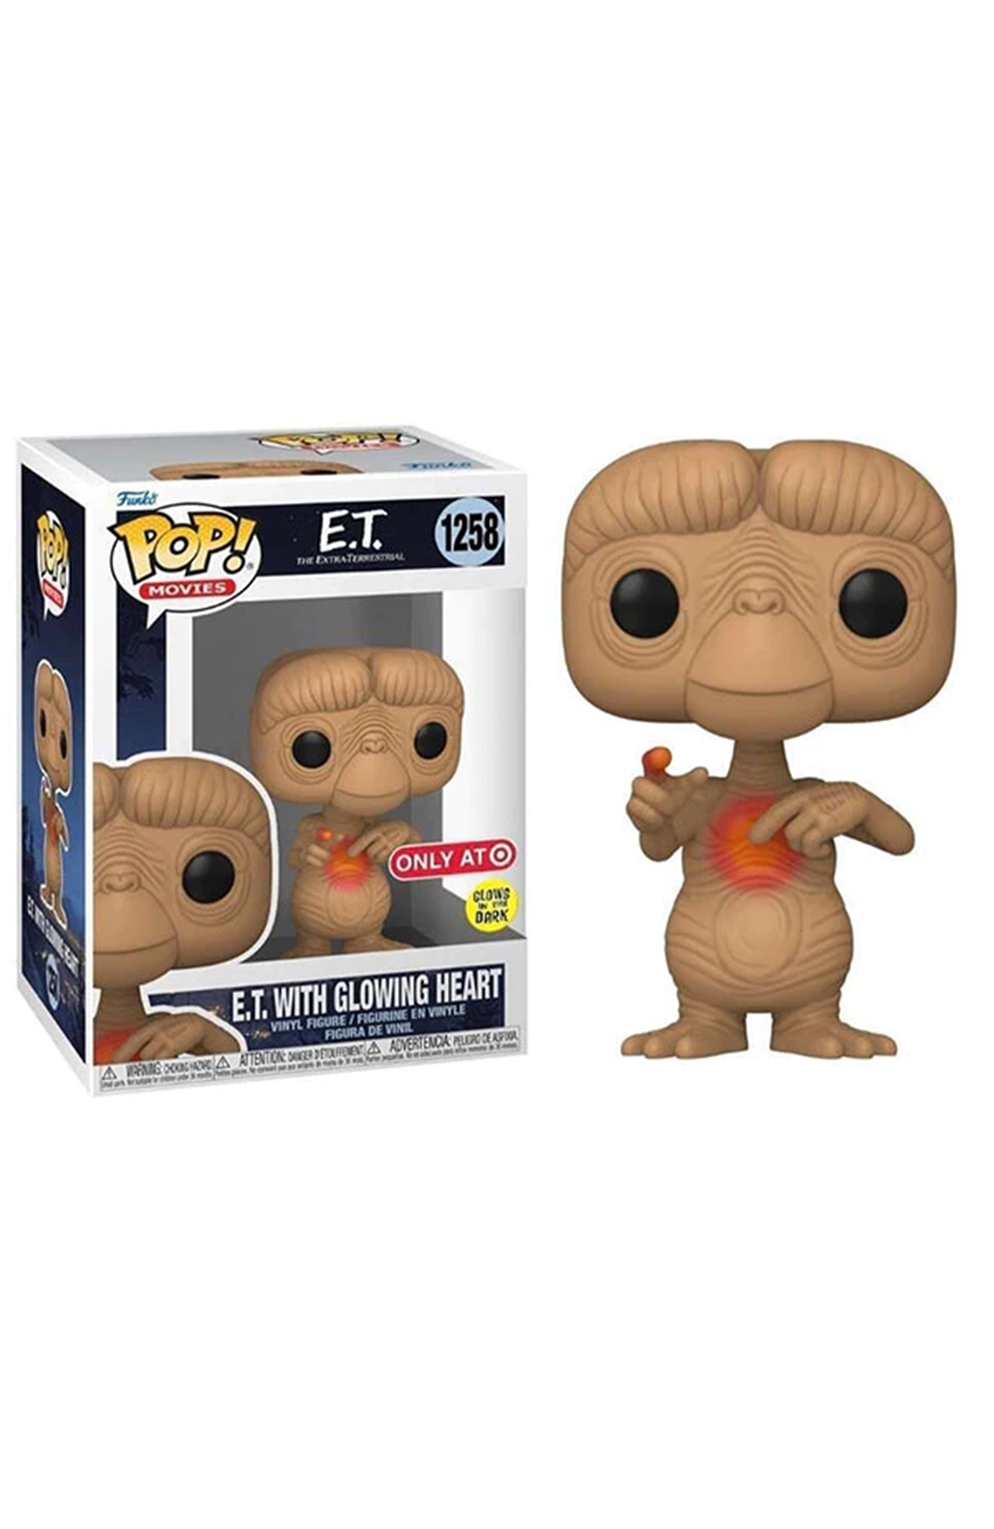 Funko Pop E.T. With Glowing Heart Target Exclusive